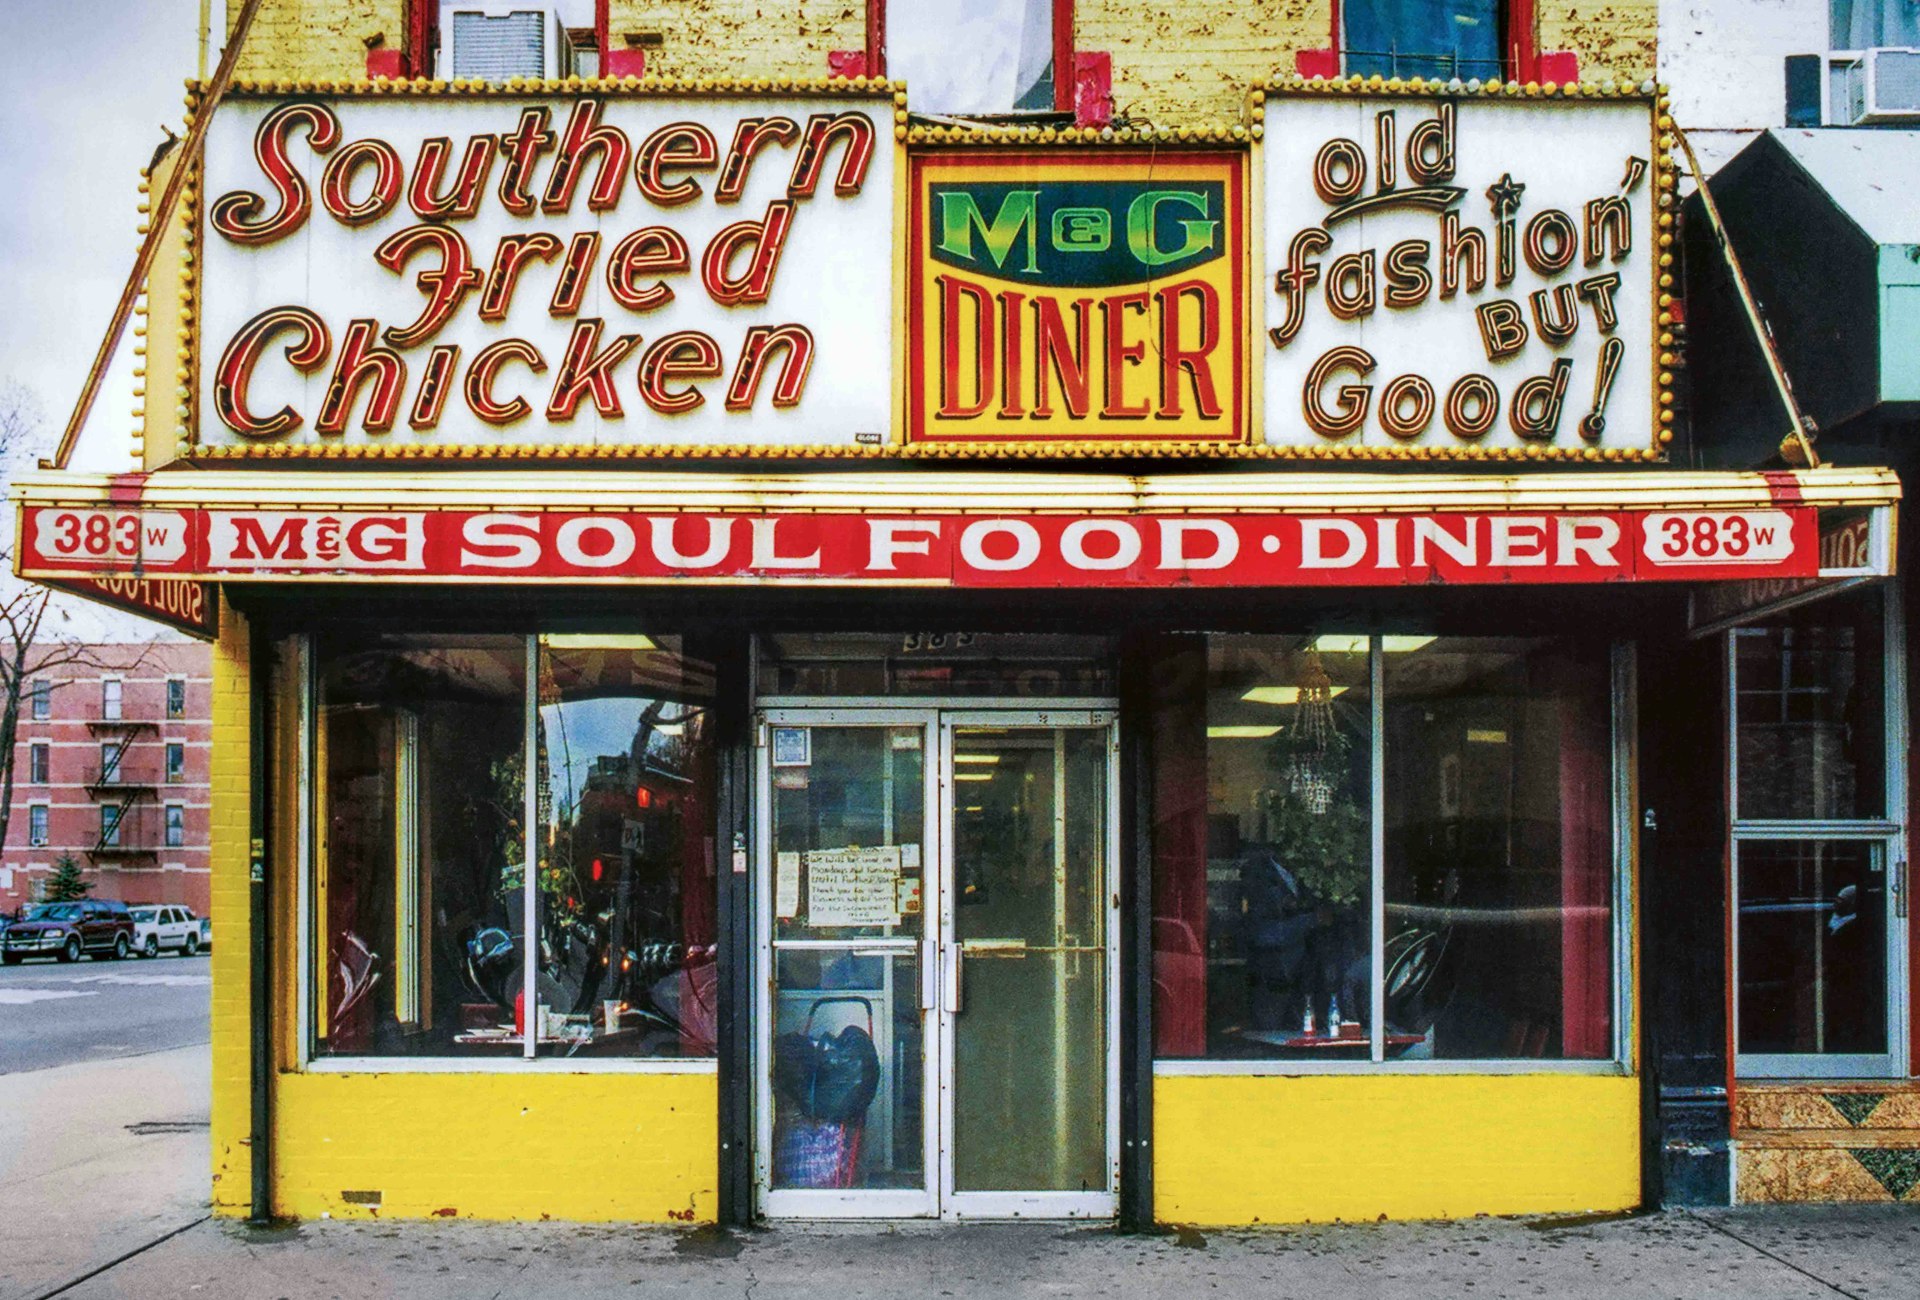 Documenting the vibrant frontages of New York’s last remaining ‘mom-and-pop’ stores